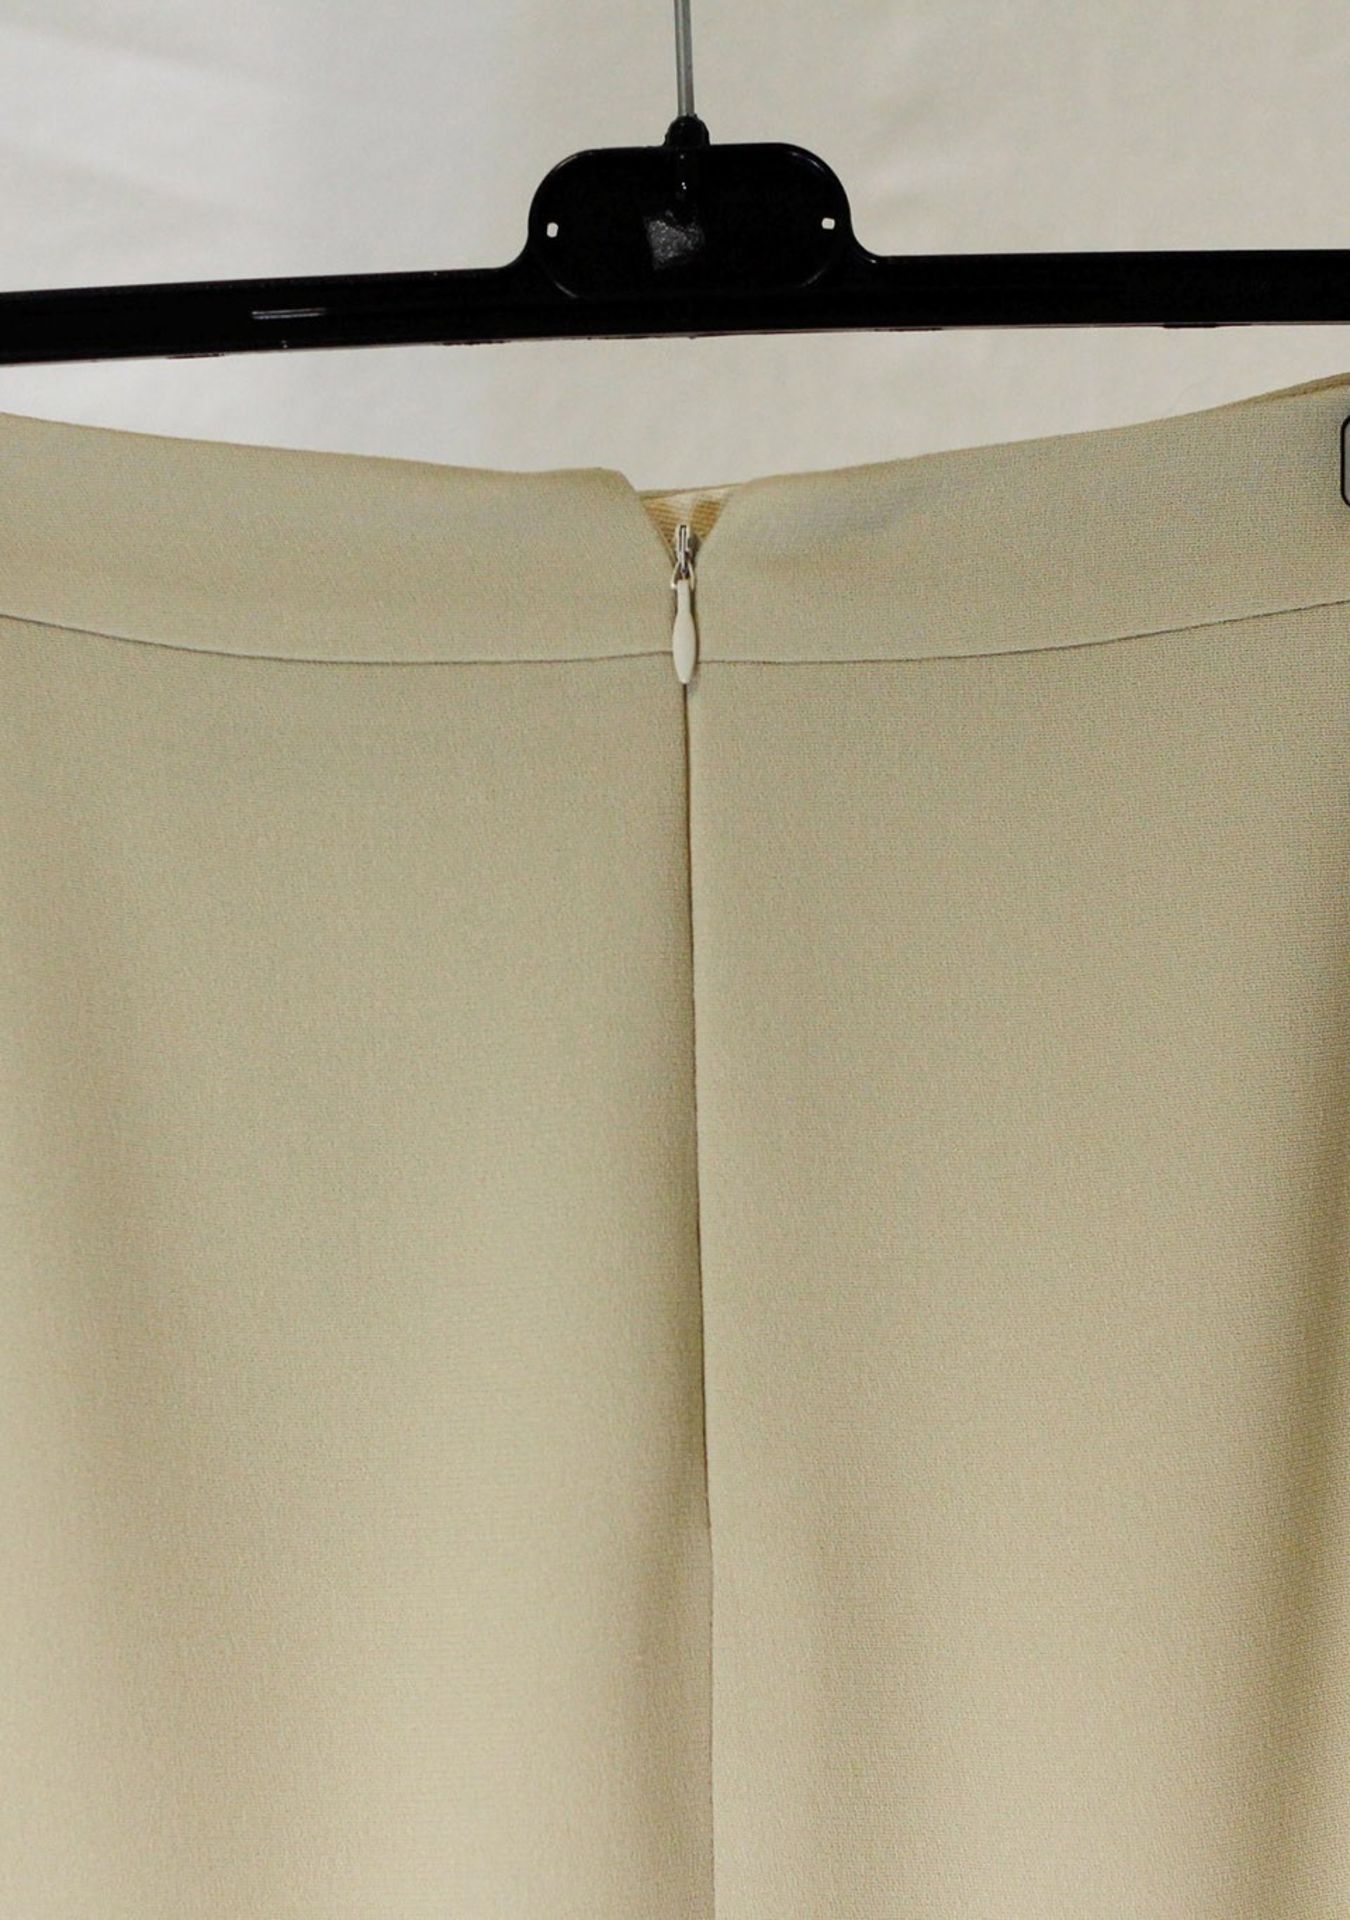 1 x Anne Belin Pistachio Skirt - Size: 16 - Material: 100% Polyester - From a High End Clothing - Image 3 of 11